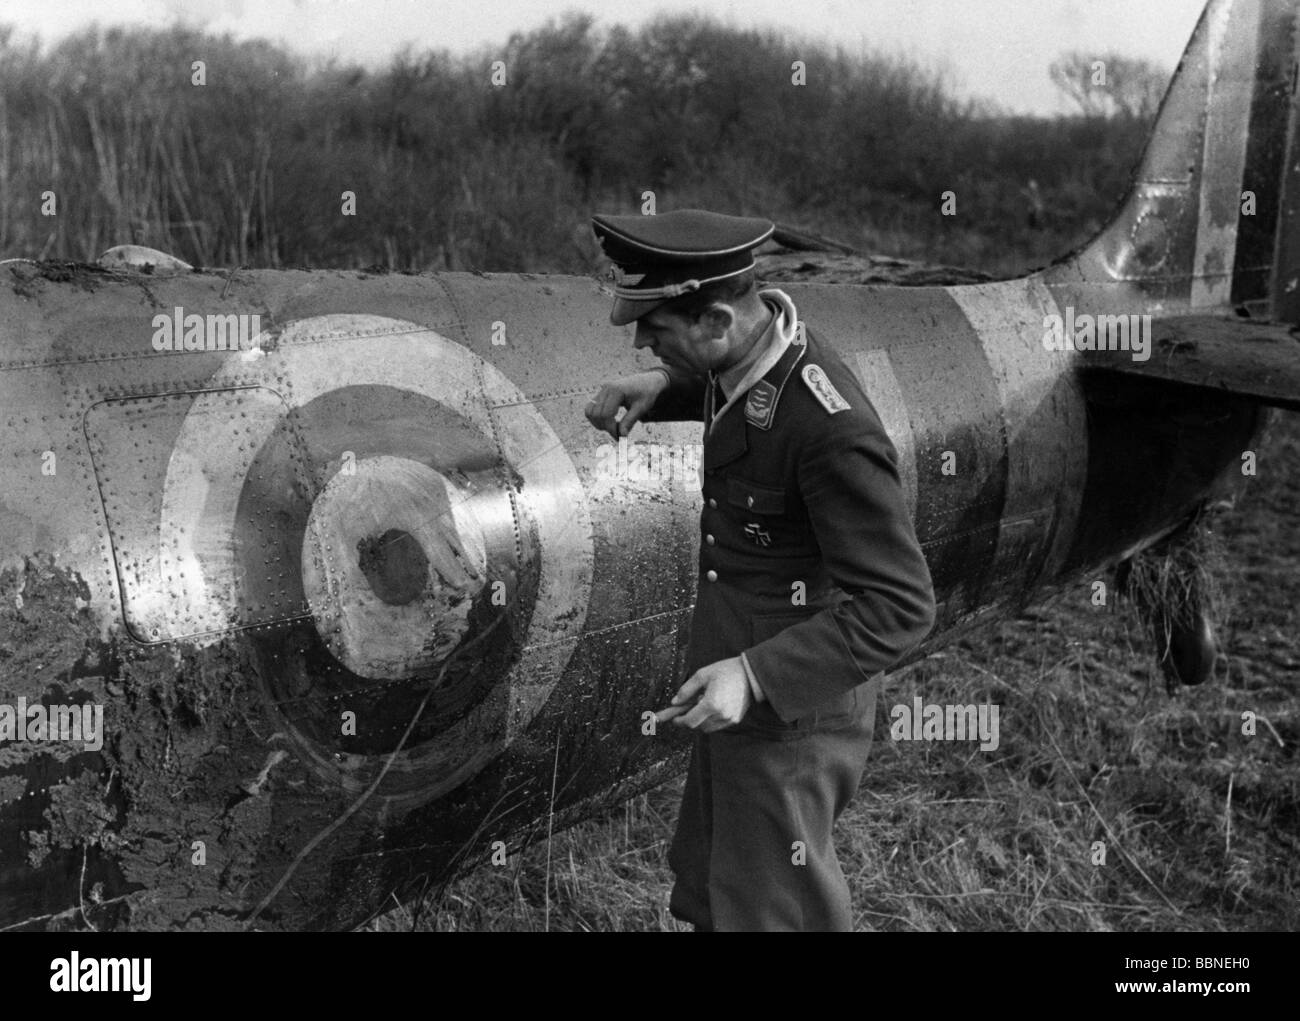 events, Second World War / WWII, aerial warfare, aircraft, crashed / damaged, German officer examining a downed British fighter Supermarine Spitfire, France, circa 1942, Stock Photo